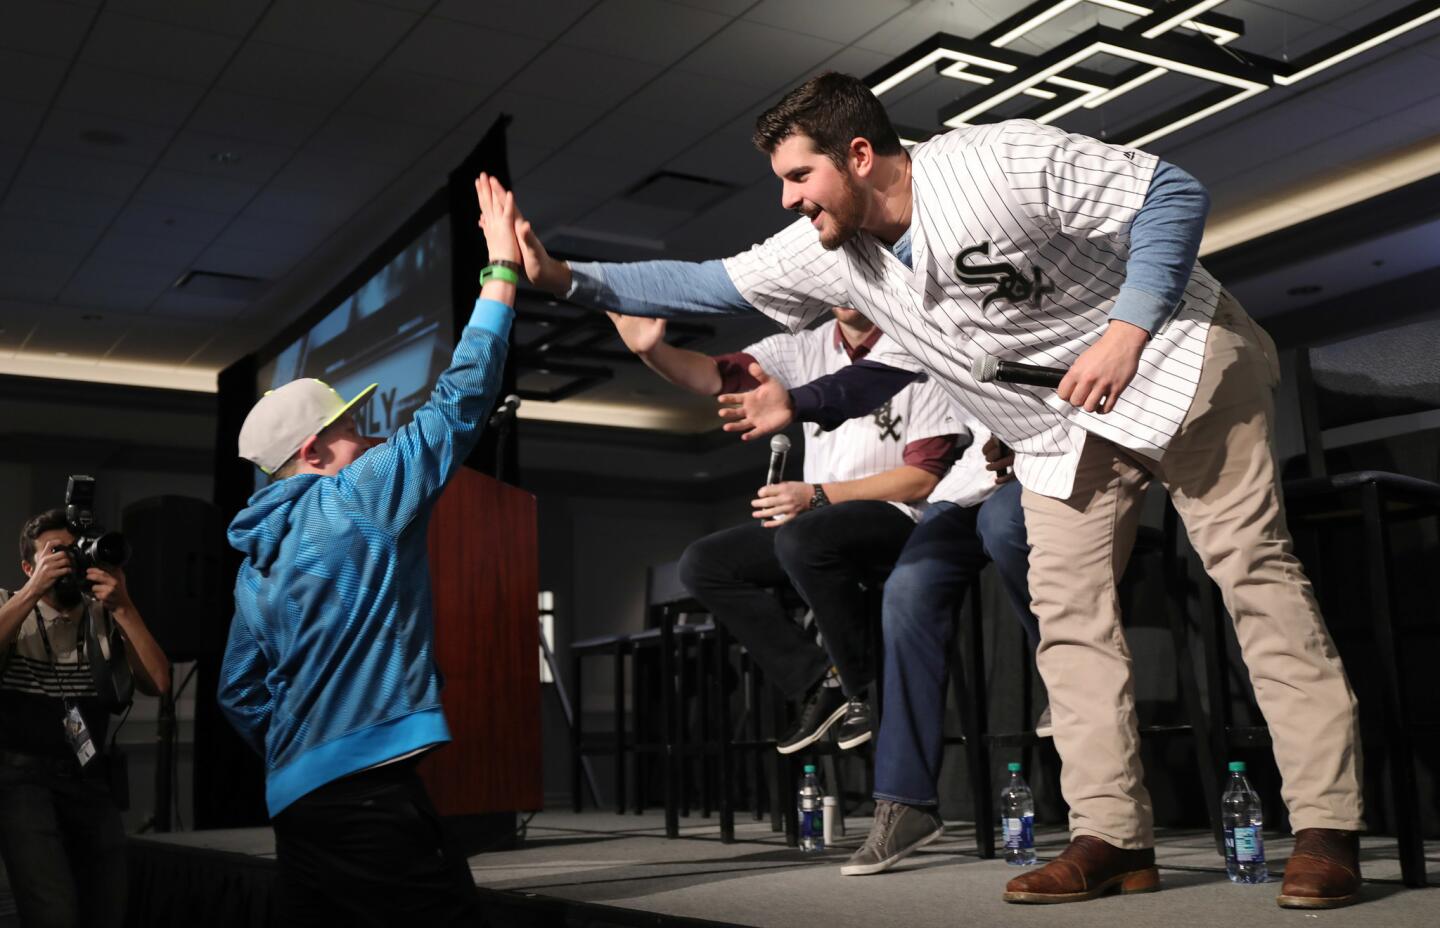 SoxFest 2016 - Los Angeles Times